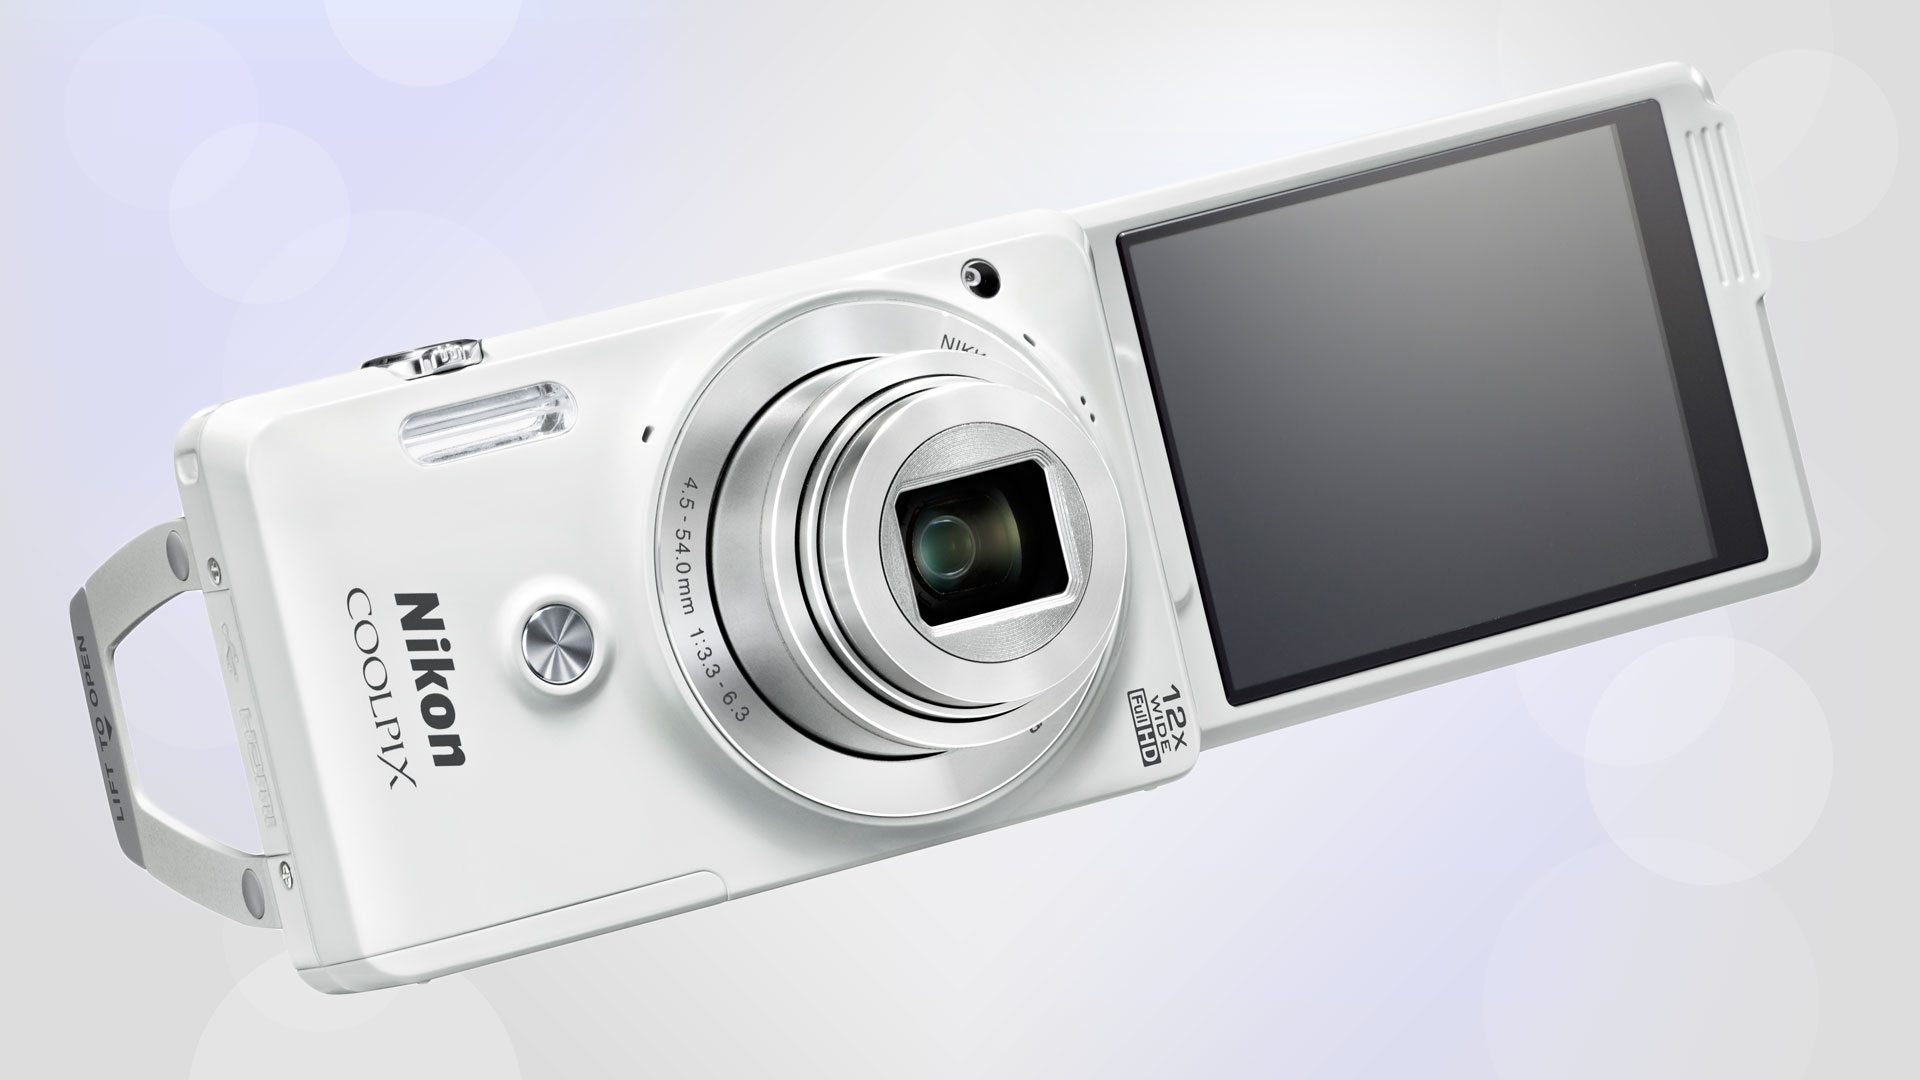 Nikon's CoolPix S6900 puts you in the picture | TechRadar